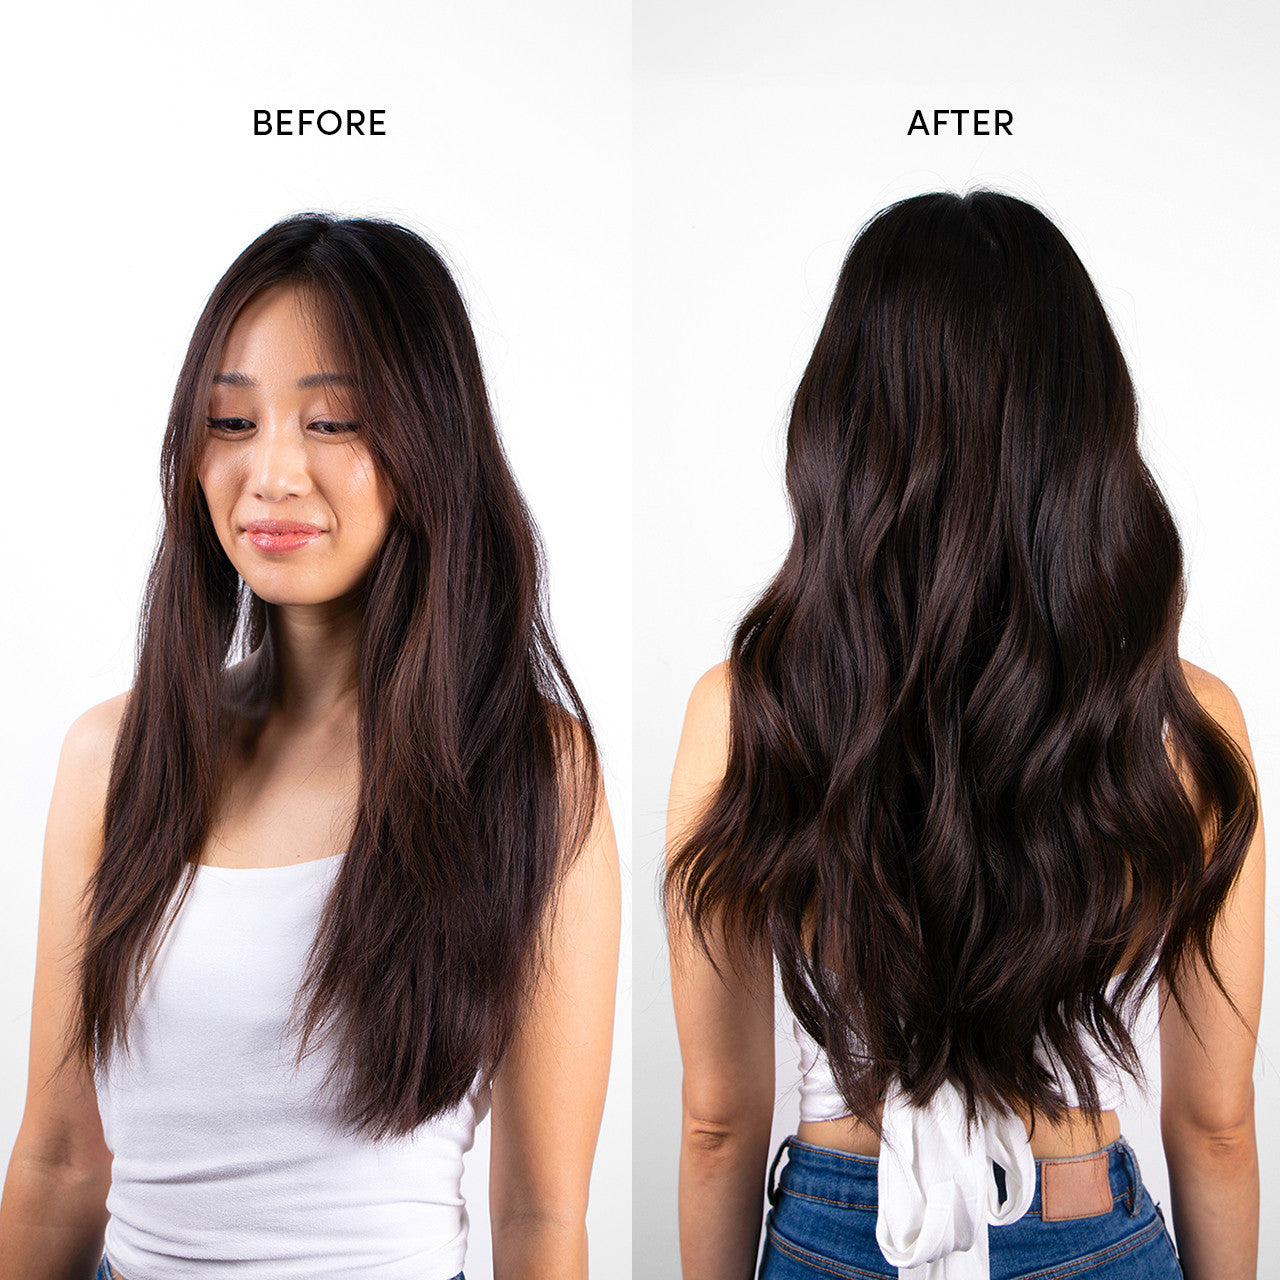 model before and after using the Dry Texture Spray